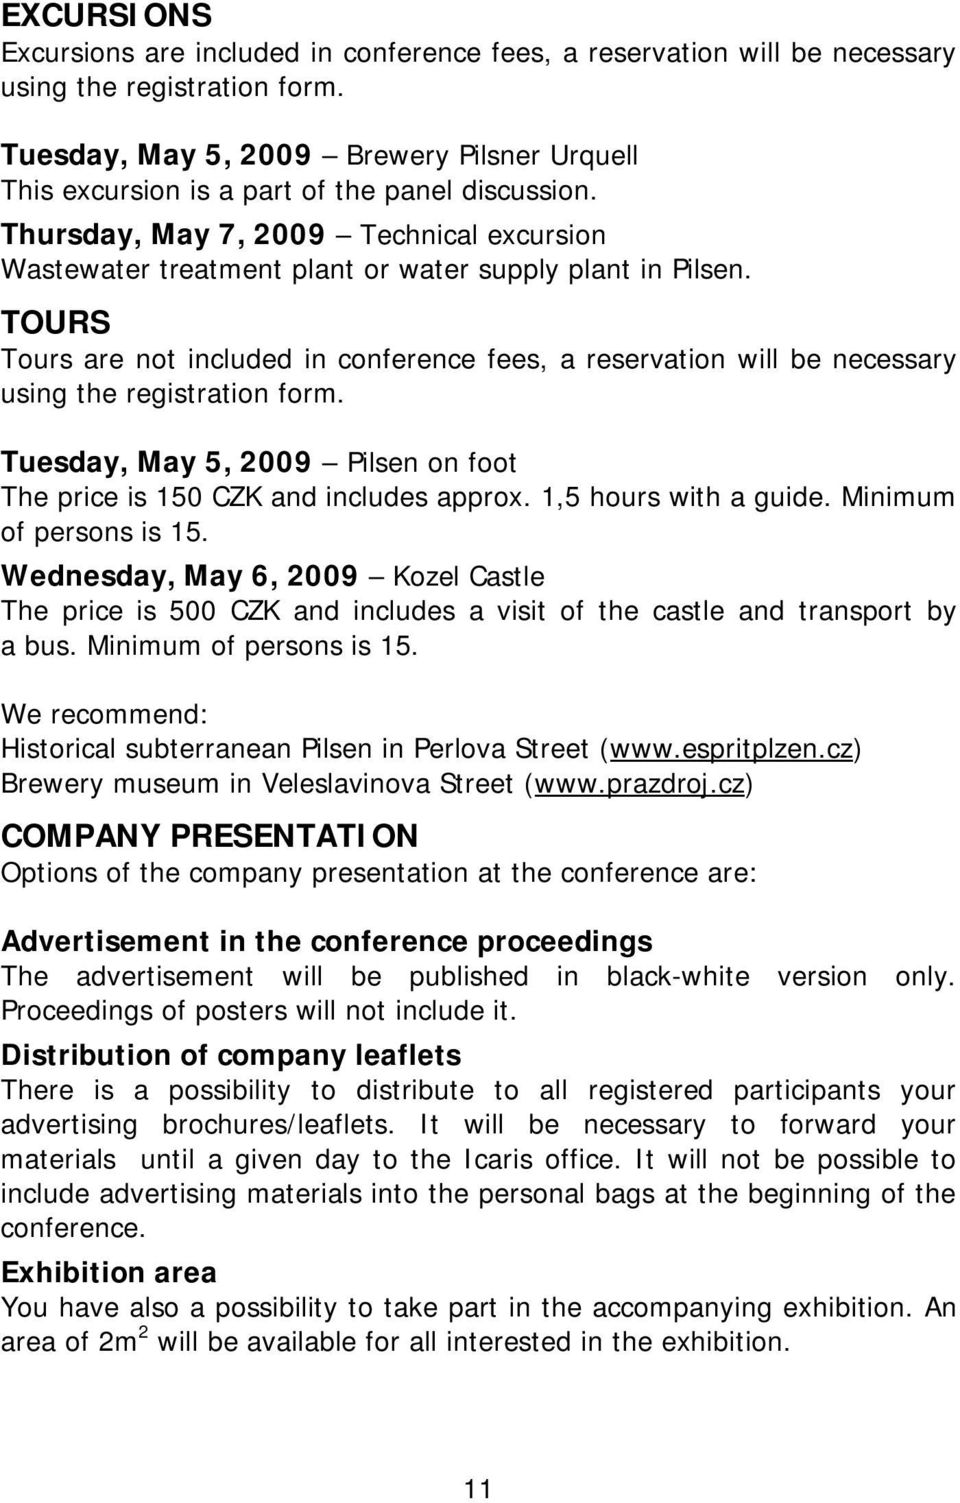 TOURS Tours are not included in conference fees, a reservation will be necessary using the registration form. Tuesday, May 5, 2009 Pilsen on foot The price is 150 CZK and includes approx.